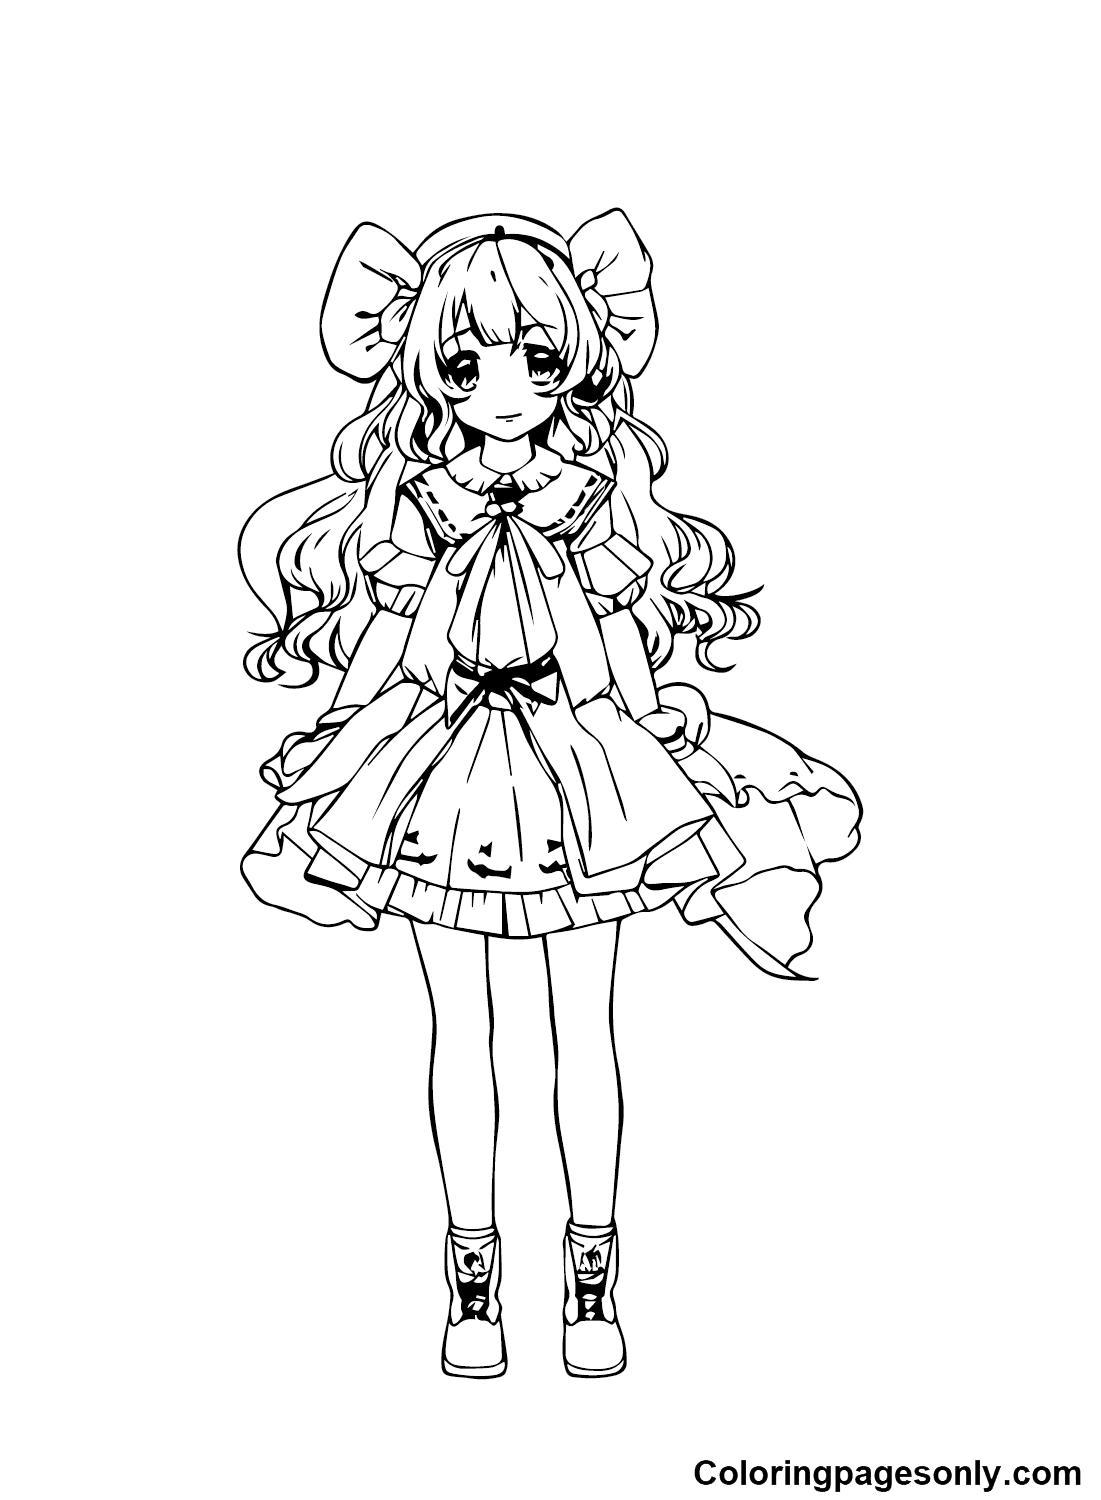 Cute Anime Girls Coloring Pages